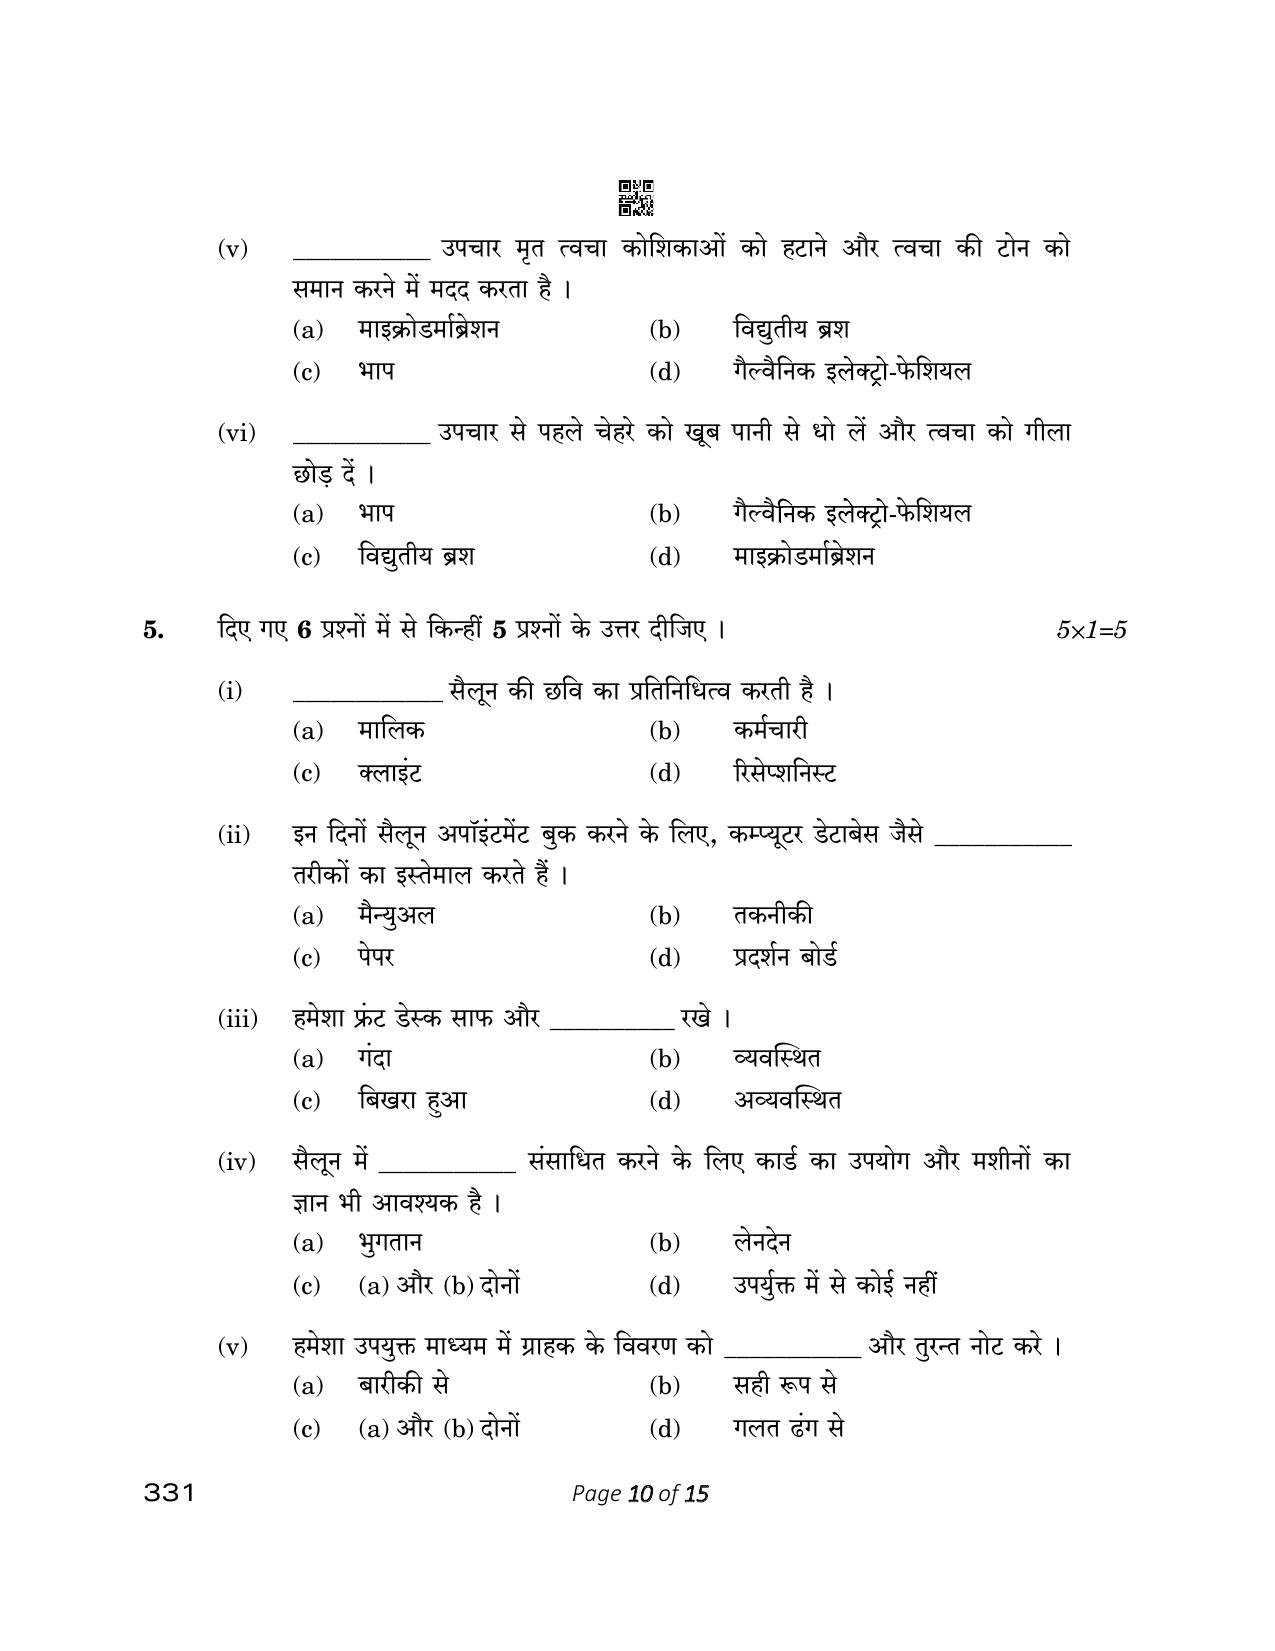 CBSE Class 12 331 Beauty And Wellness 2023 Question Paper - Page 10